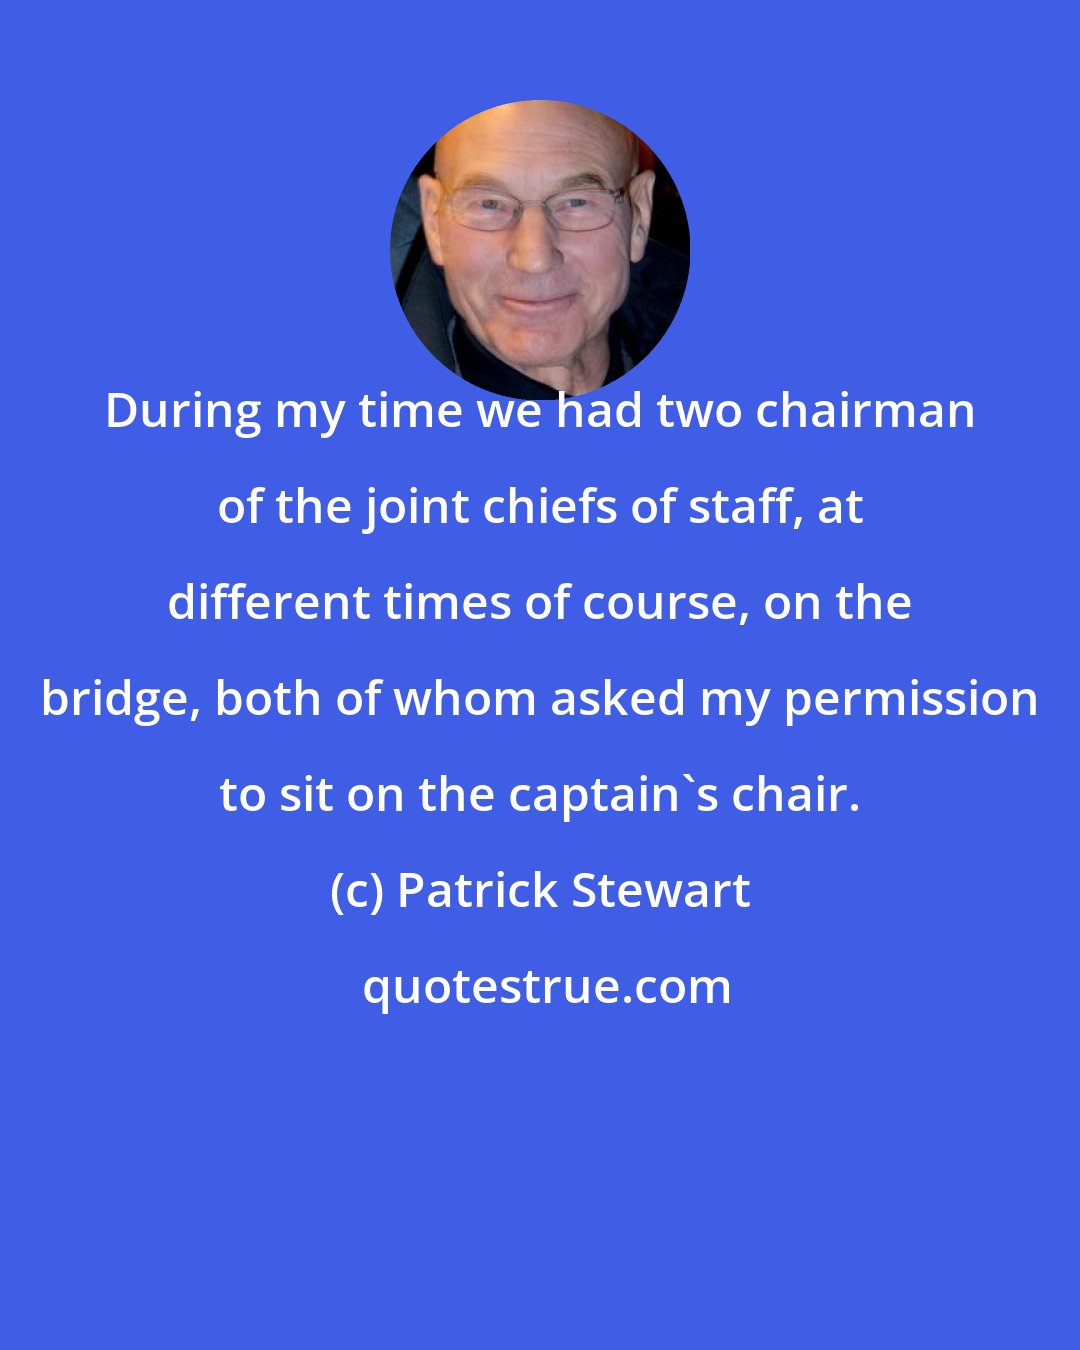 Patrick Stewart: During my time we had two chairman of the joint chiefs of staff, at different times of course, on the bridge, both of whom asked my permission to sit on the captain's chair.